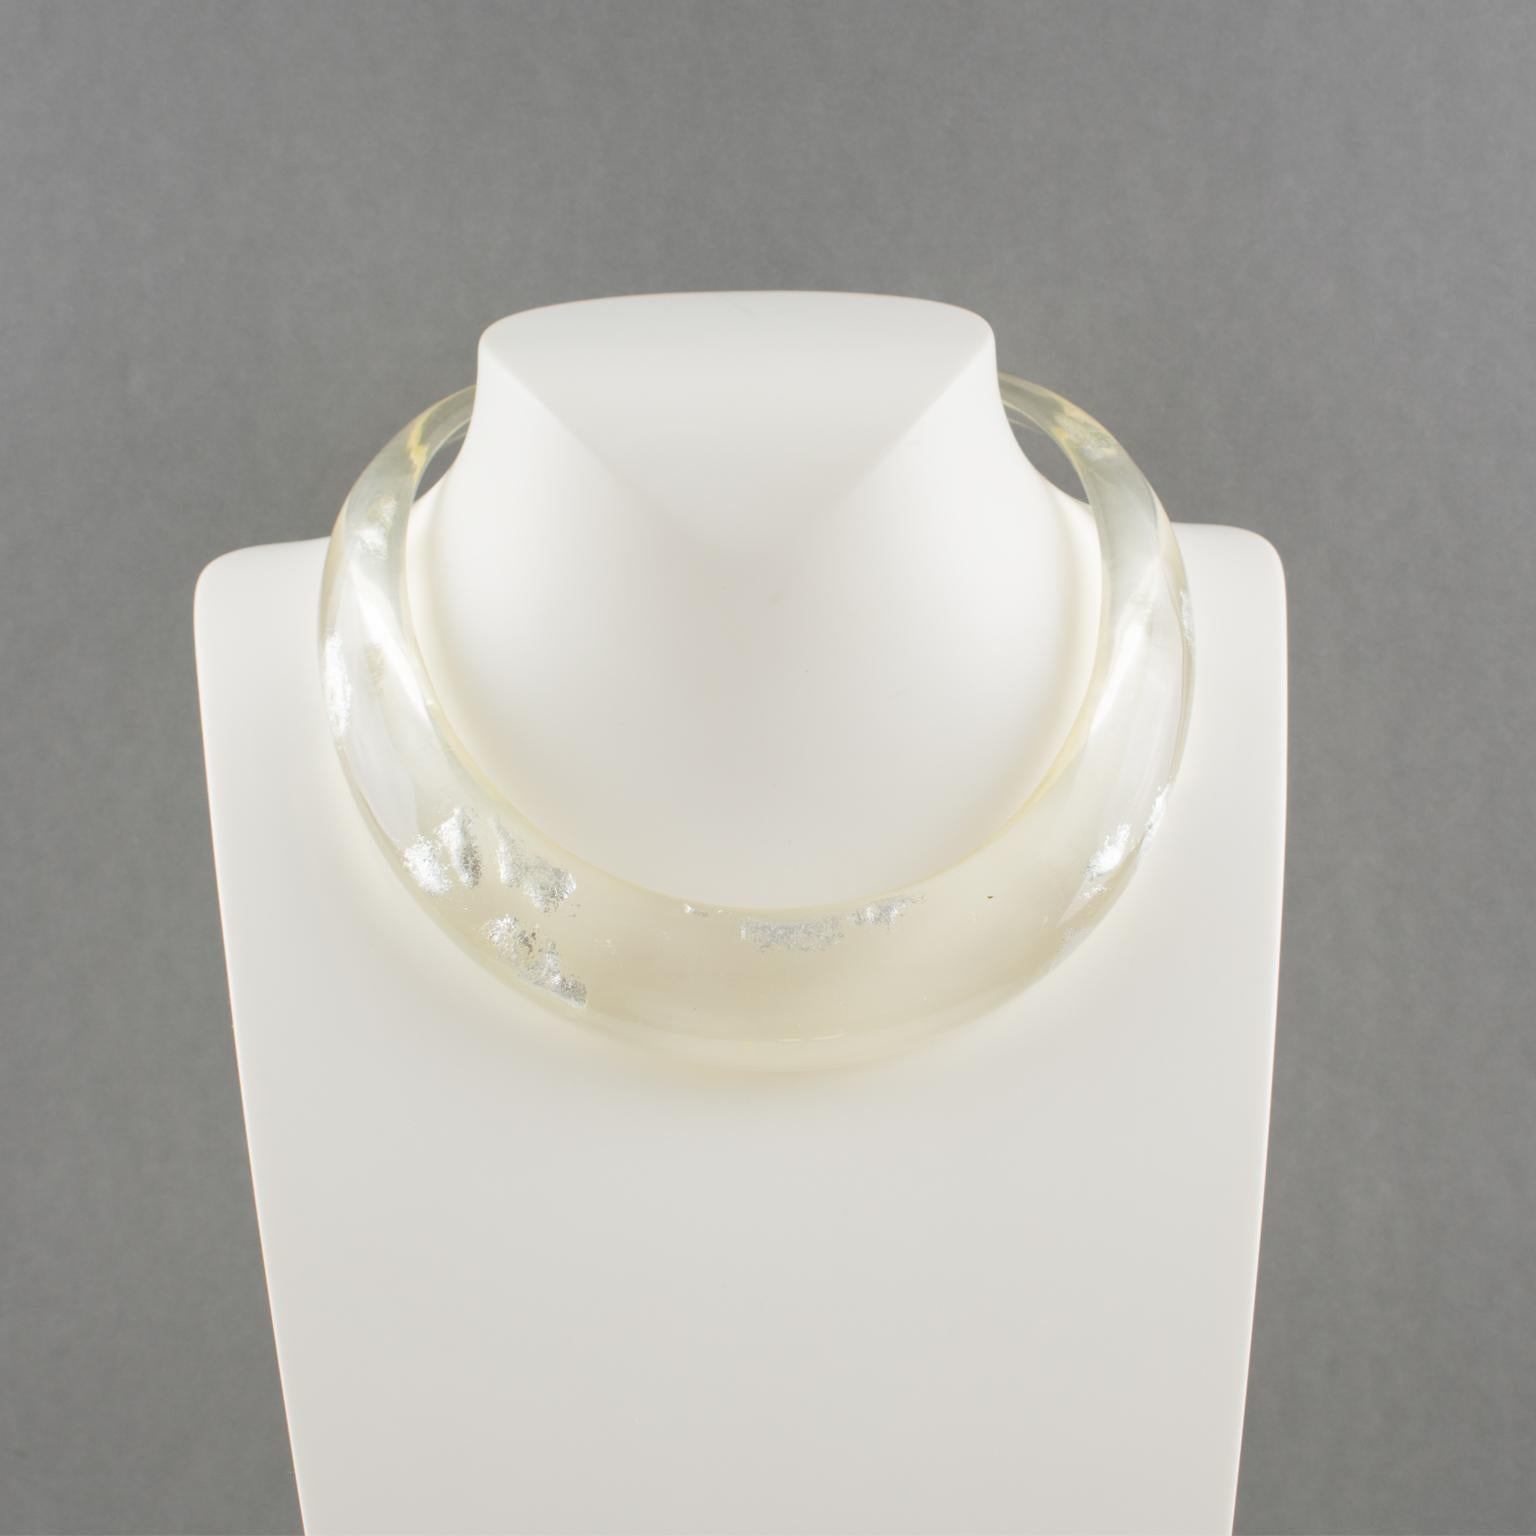 Transparent Resin Rigid Collar Necklace with Silver Flakes Inclusions In Excellent Condition For Sale In Atlanta, GA